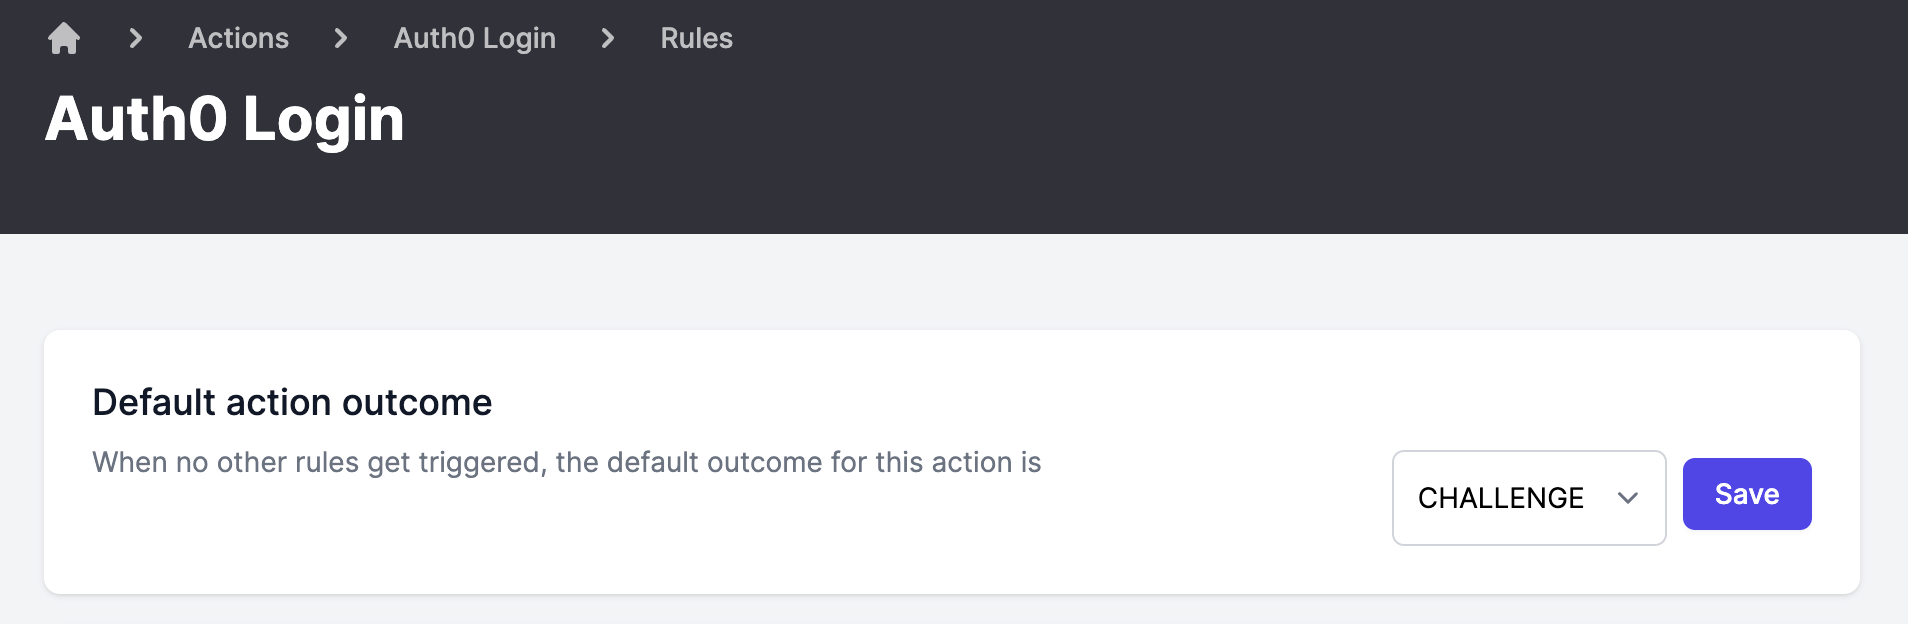 Screenshot of setting the default action outcome in Auth0